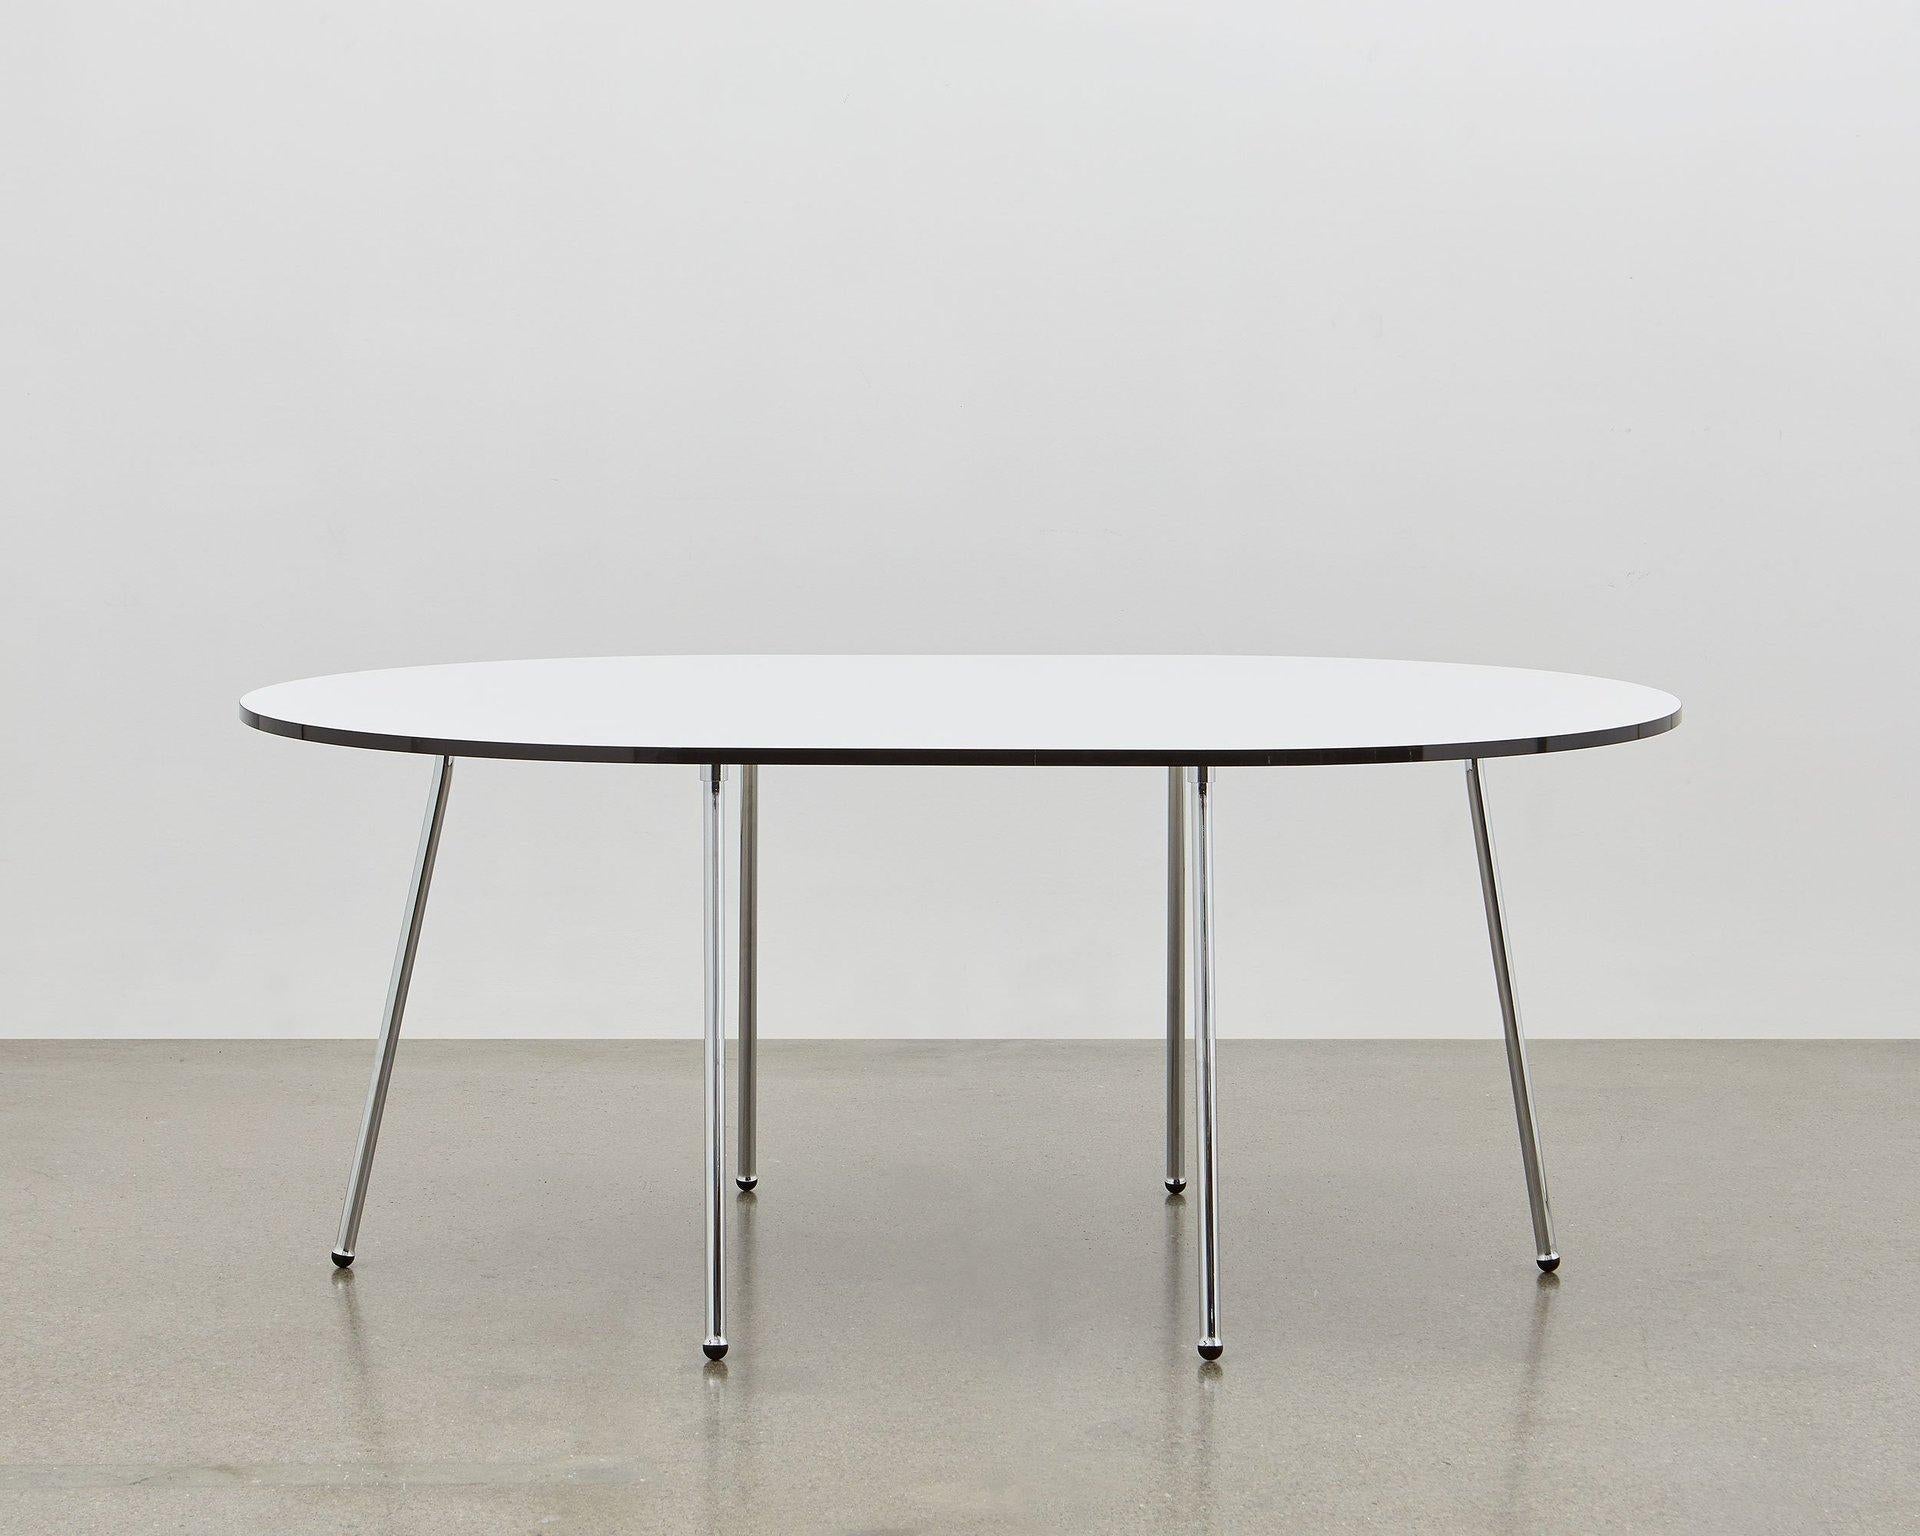 The PH Dining Table was designed in 1937; it is simple and elegant. Function meets form and the distinctive, light look of the PH Dining Table makes it suitable for any purpose at the home, at work or in the meeting room.

The PH Dining Table can